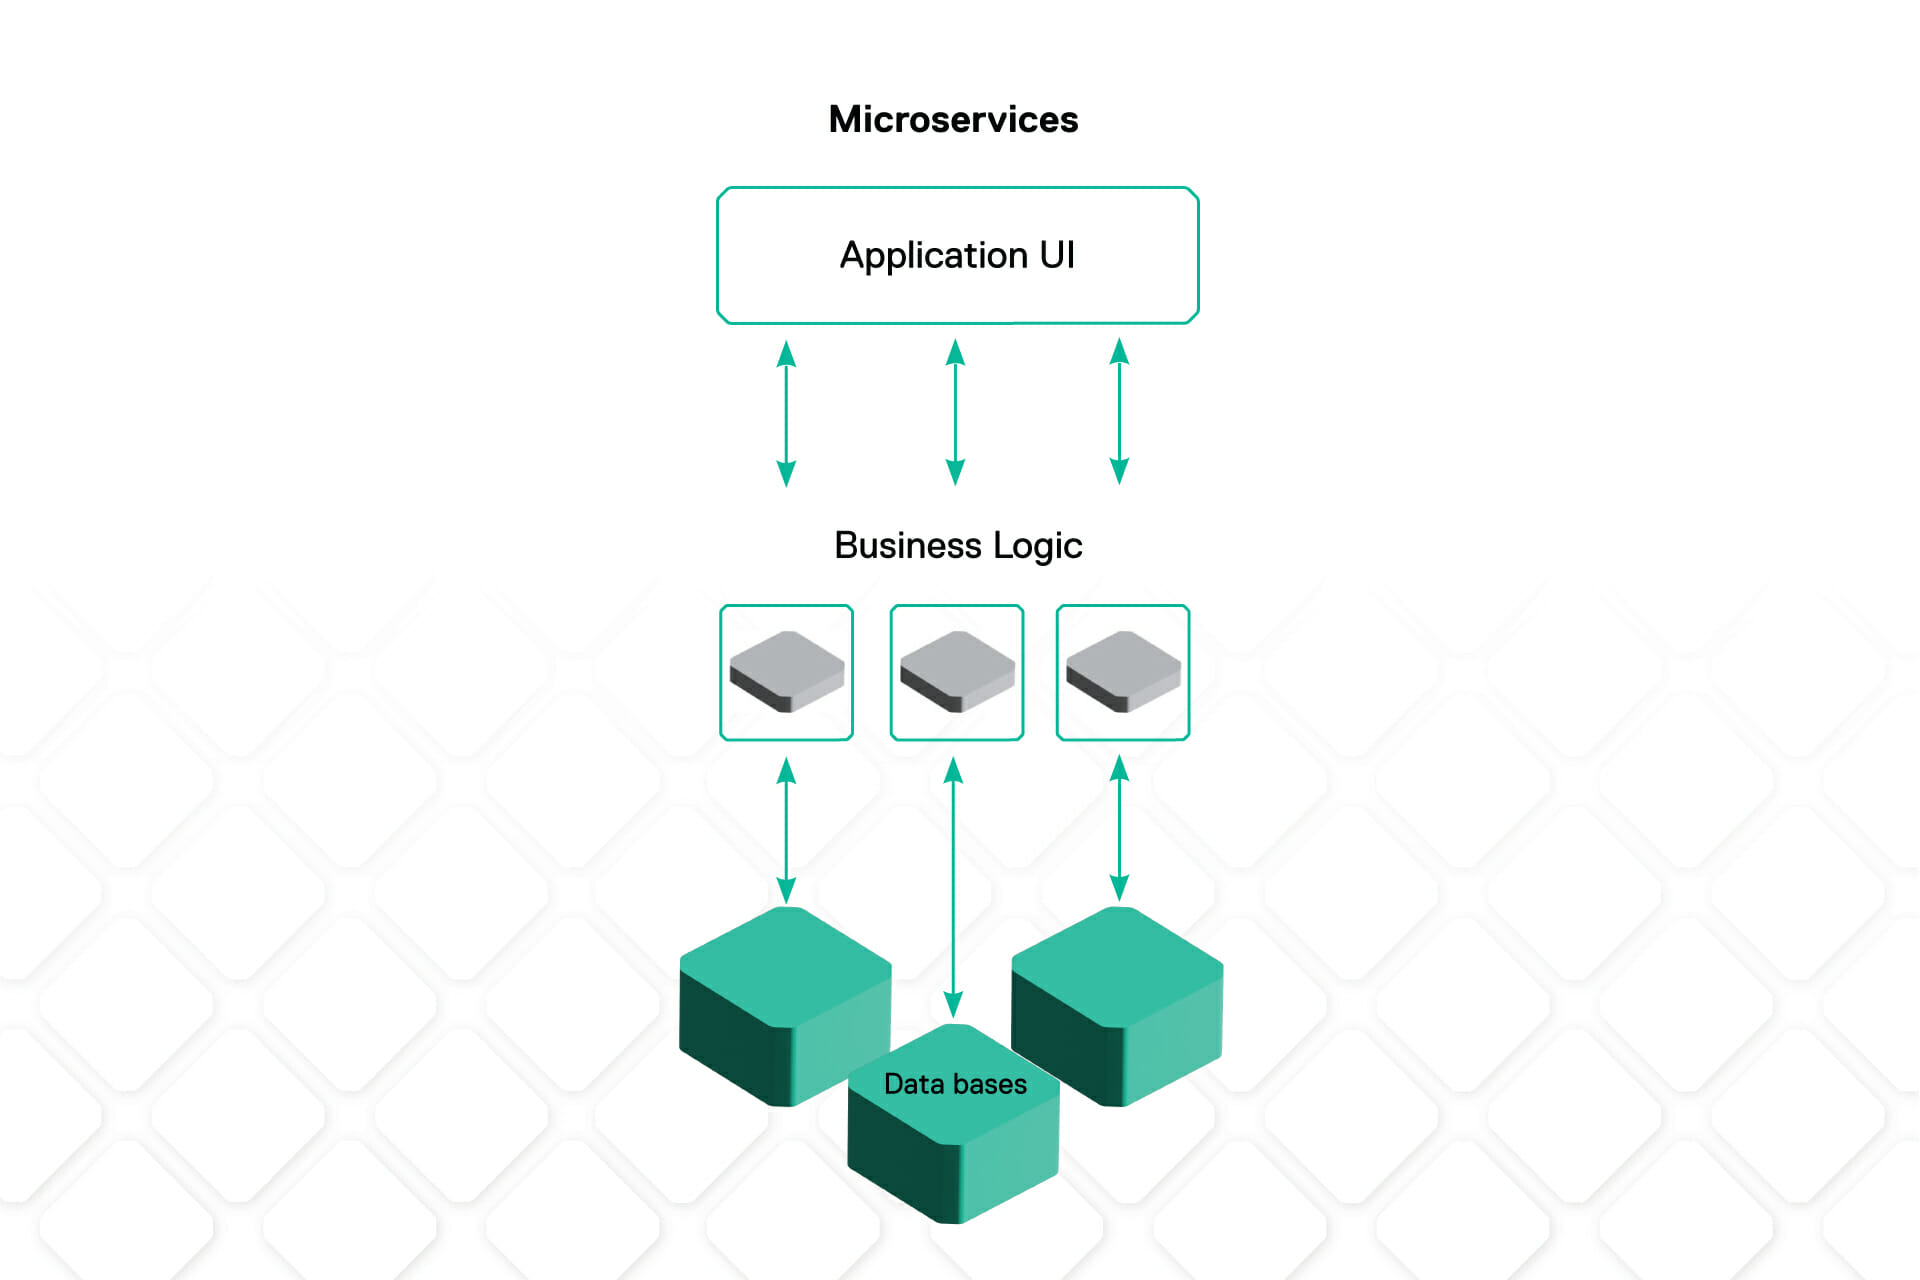 Microservices architecture. Monoliths, microservices, and PBCs